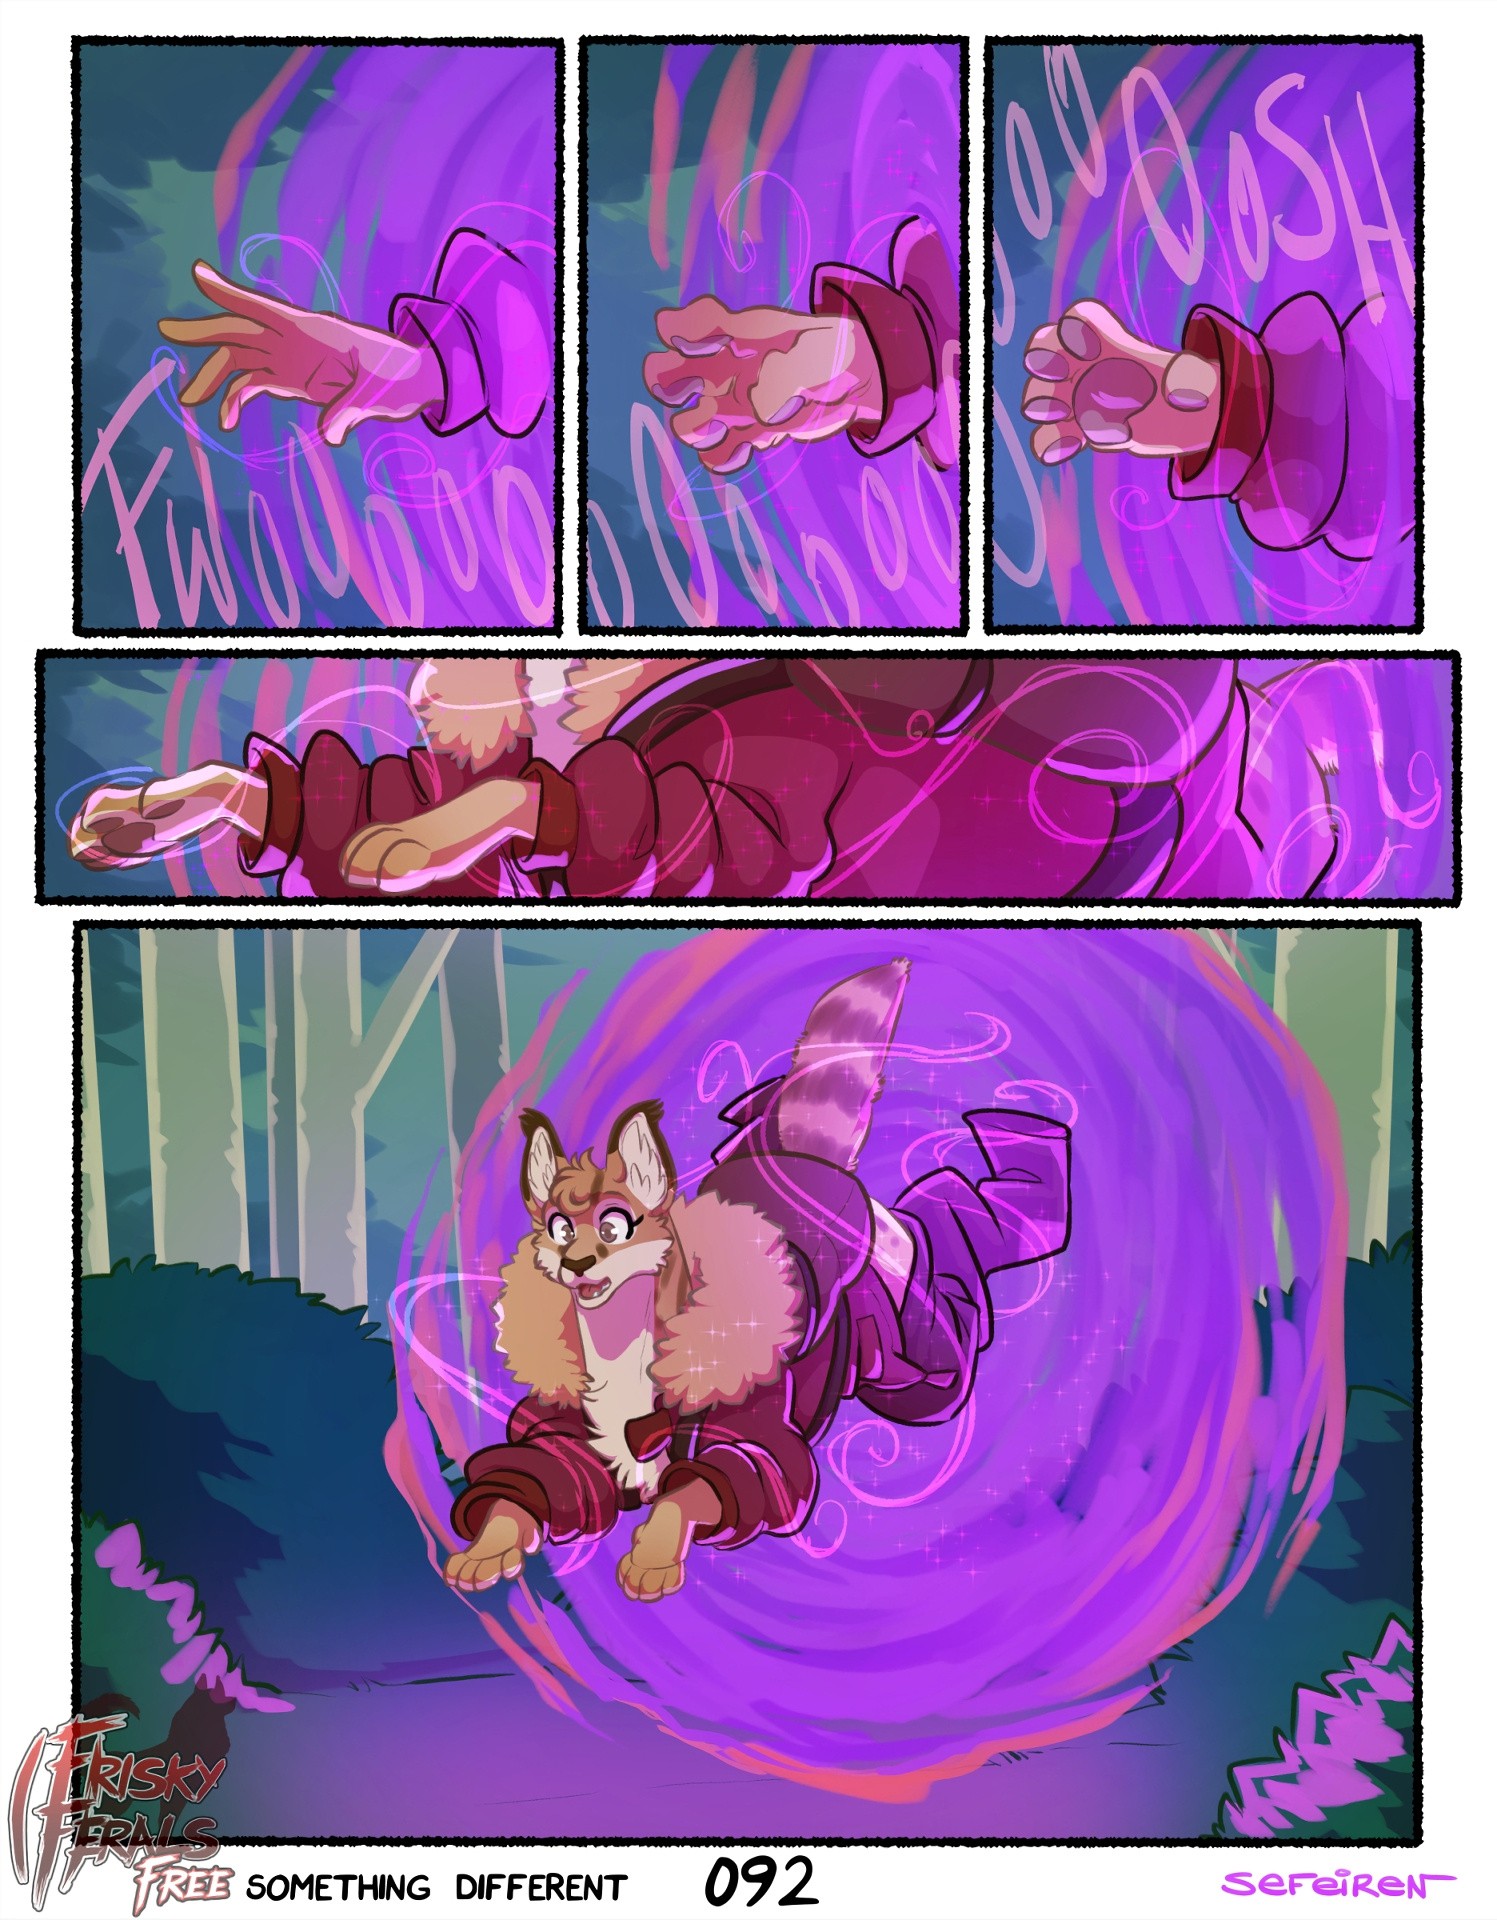 Frisky Ferals - Something Different porn comic picture 92